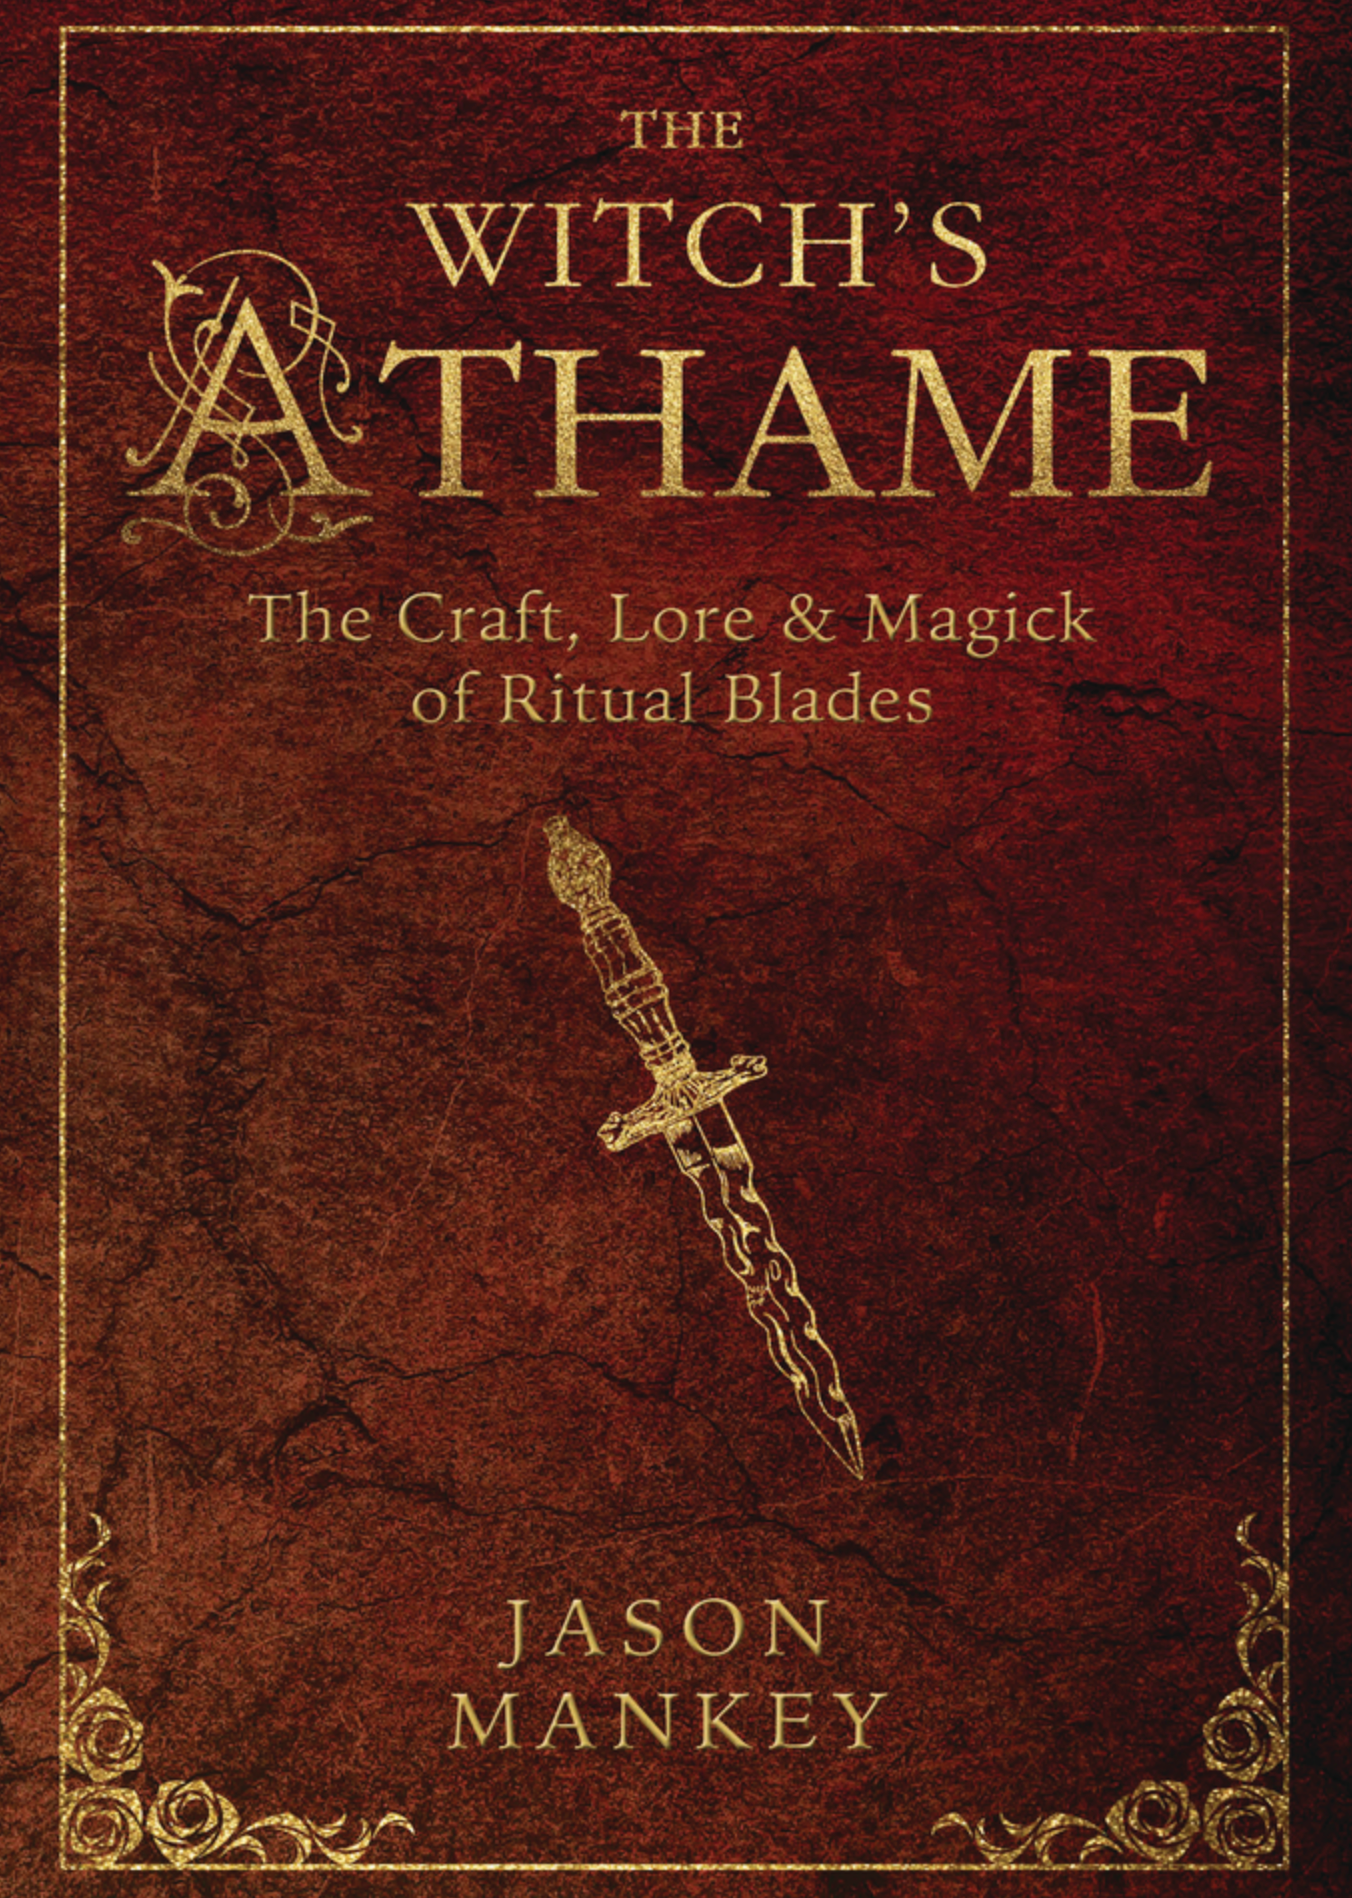 the witch’s athame